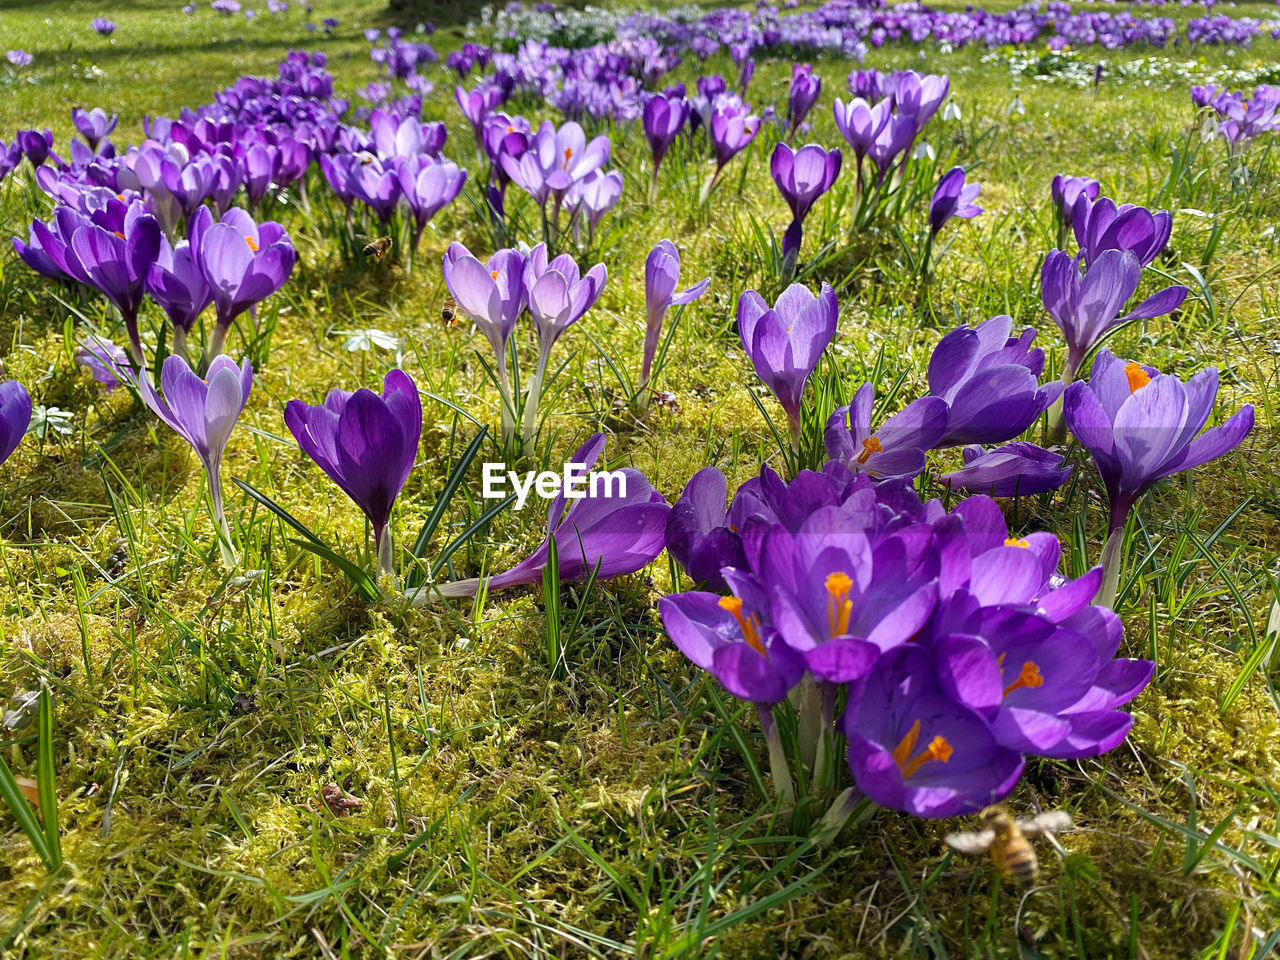 plant, flower, flowering plant, purple, beauty in nature, freshness, growth, fragility, field, nature, land, crocus, iris, petal, close-up, no people, day, inflorescence, flower head, grass, wildflower, springtime, high angle view, outdoors, meadow, green, botany, sunlight, blossom